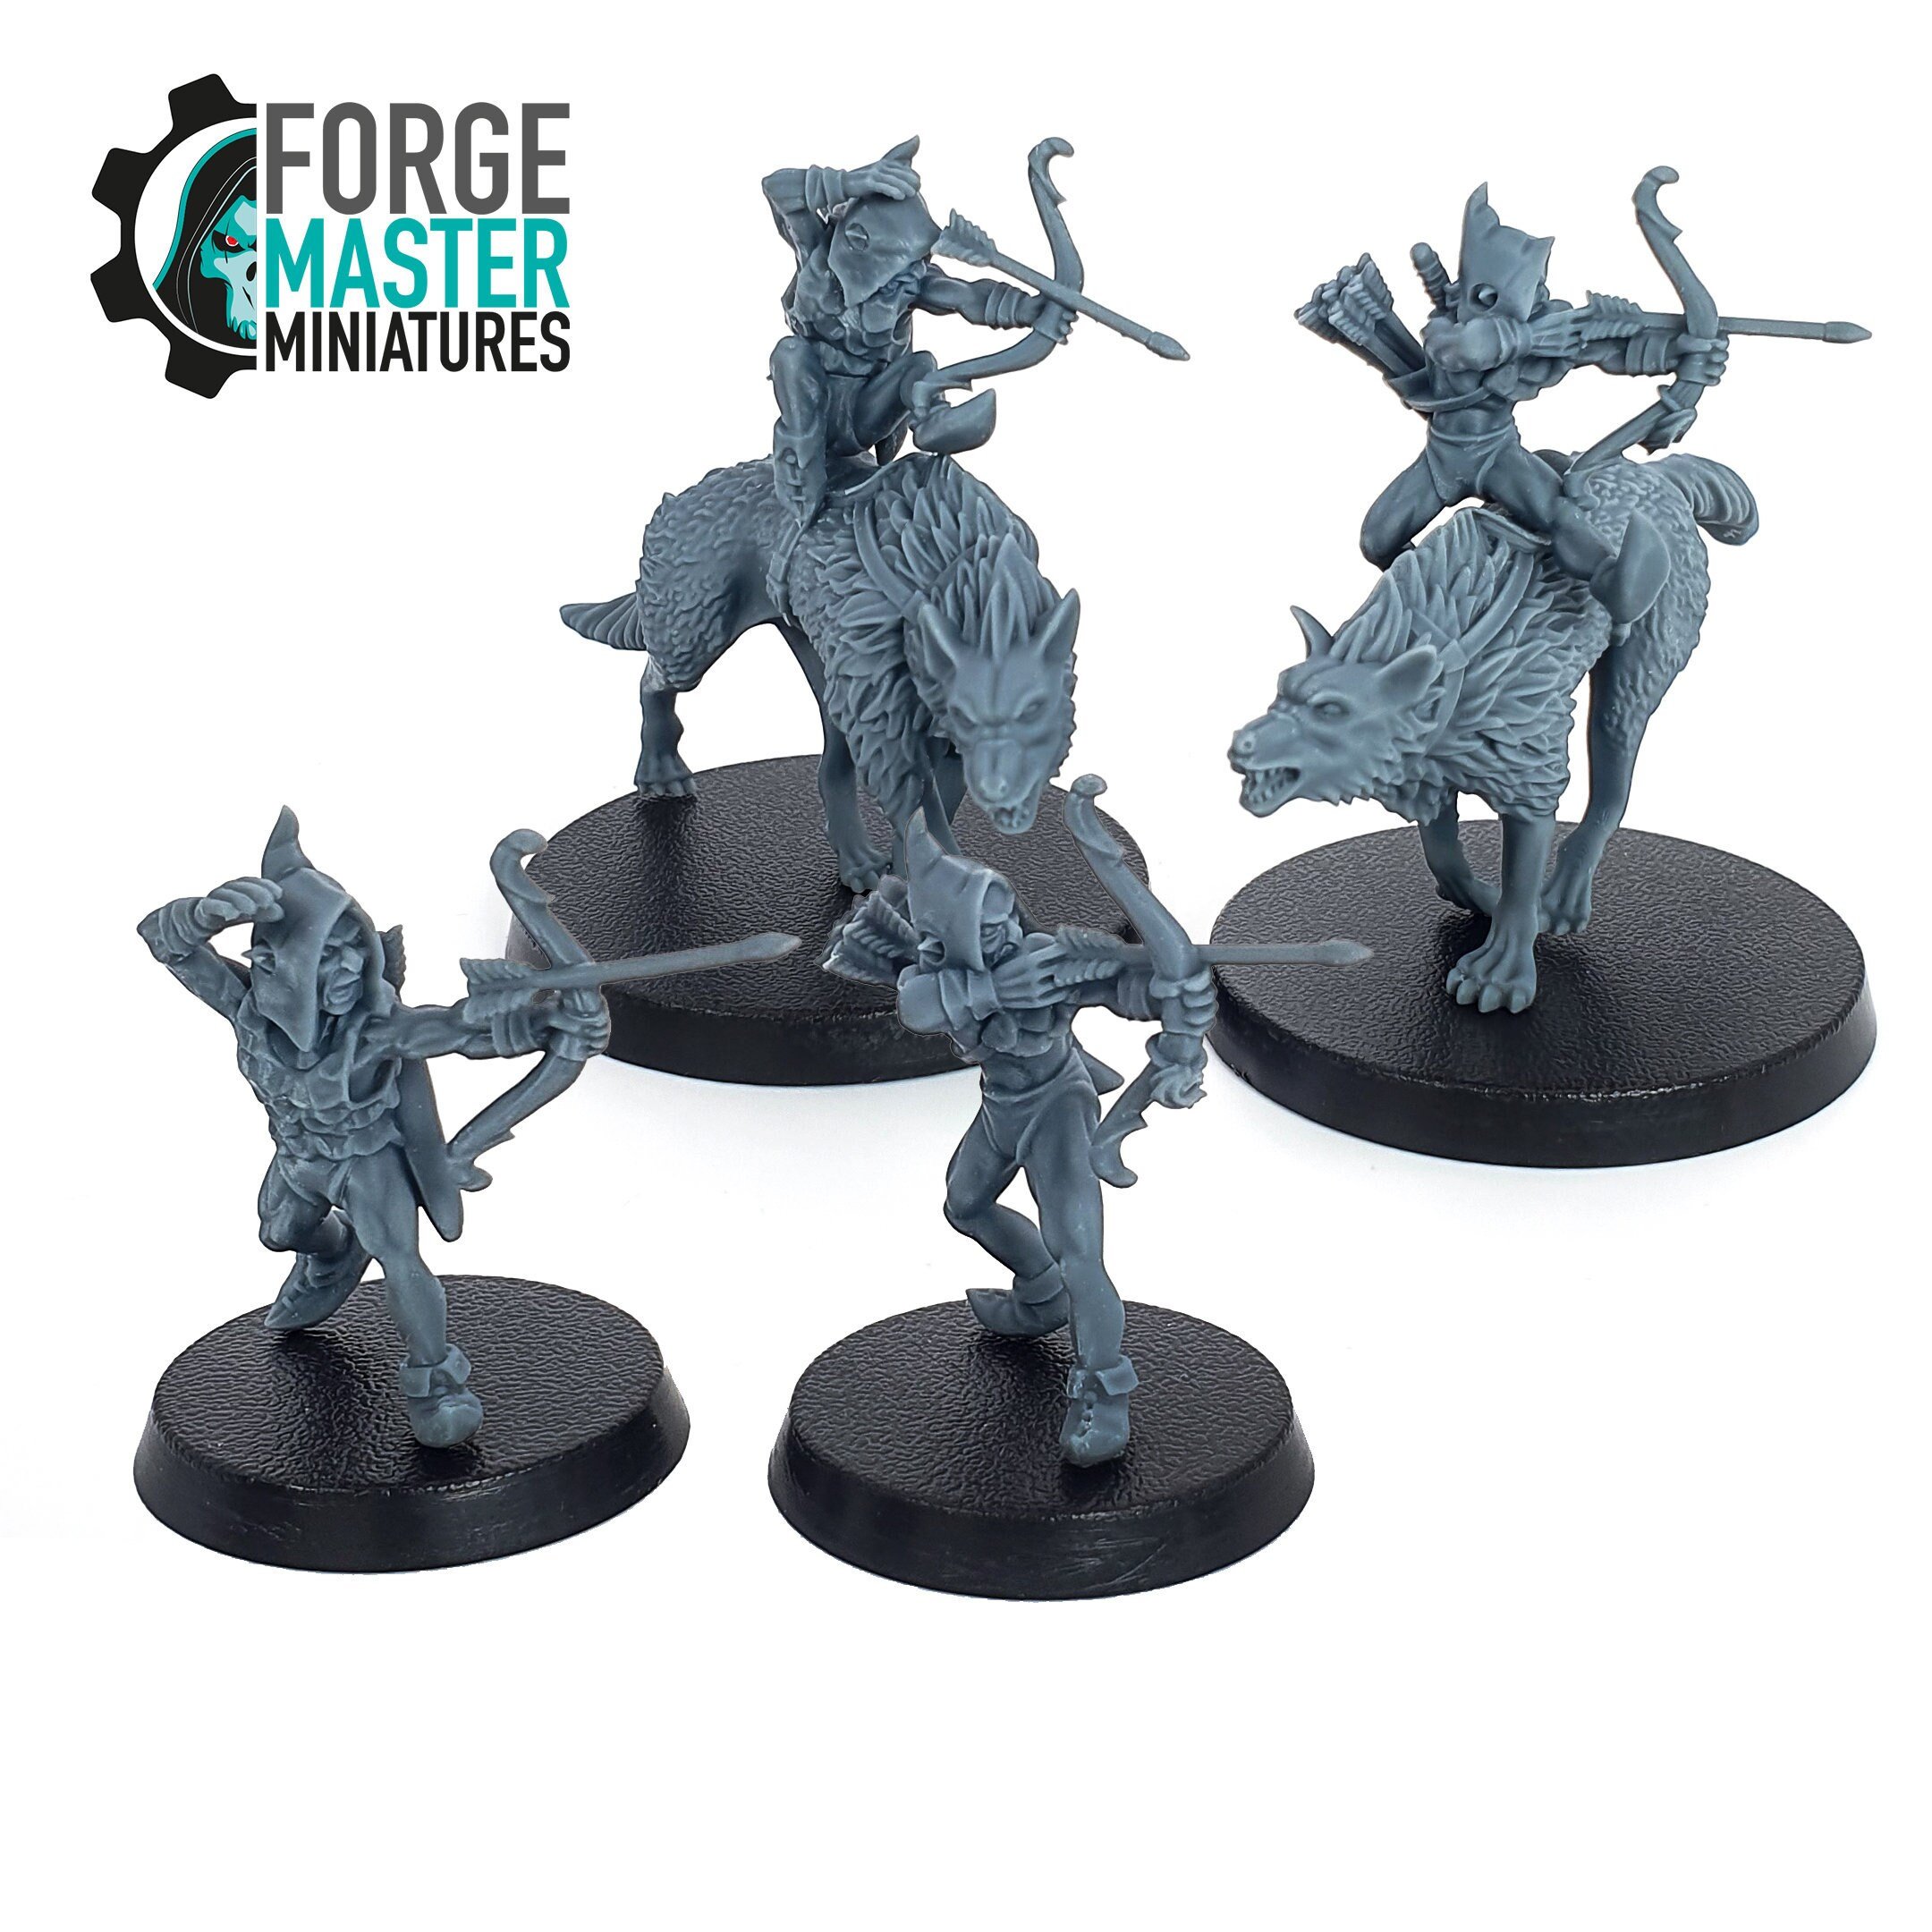 Goblin Warg Riders with Bow wargaming miniatures by Medbury Miniatures 3D printed by Forgemaster Miniatures high quality ultra detail